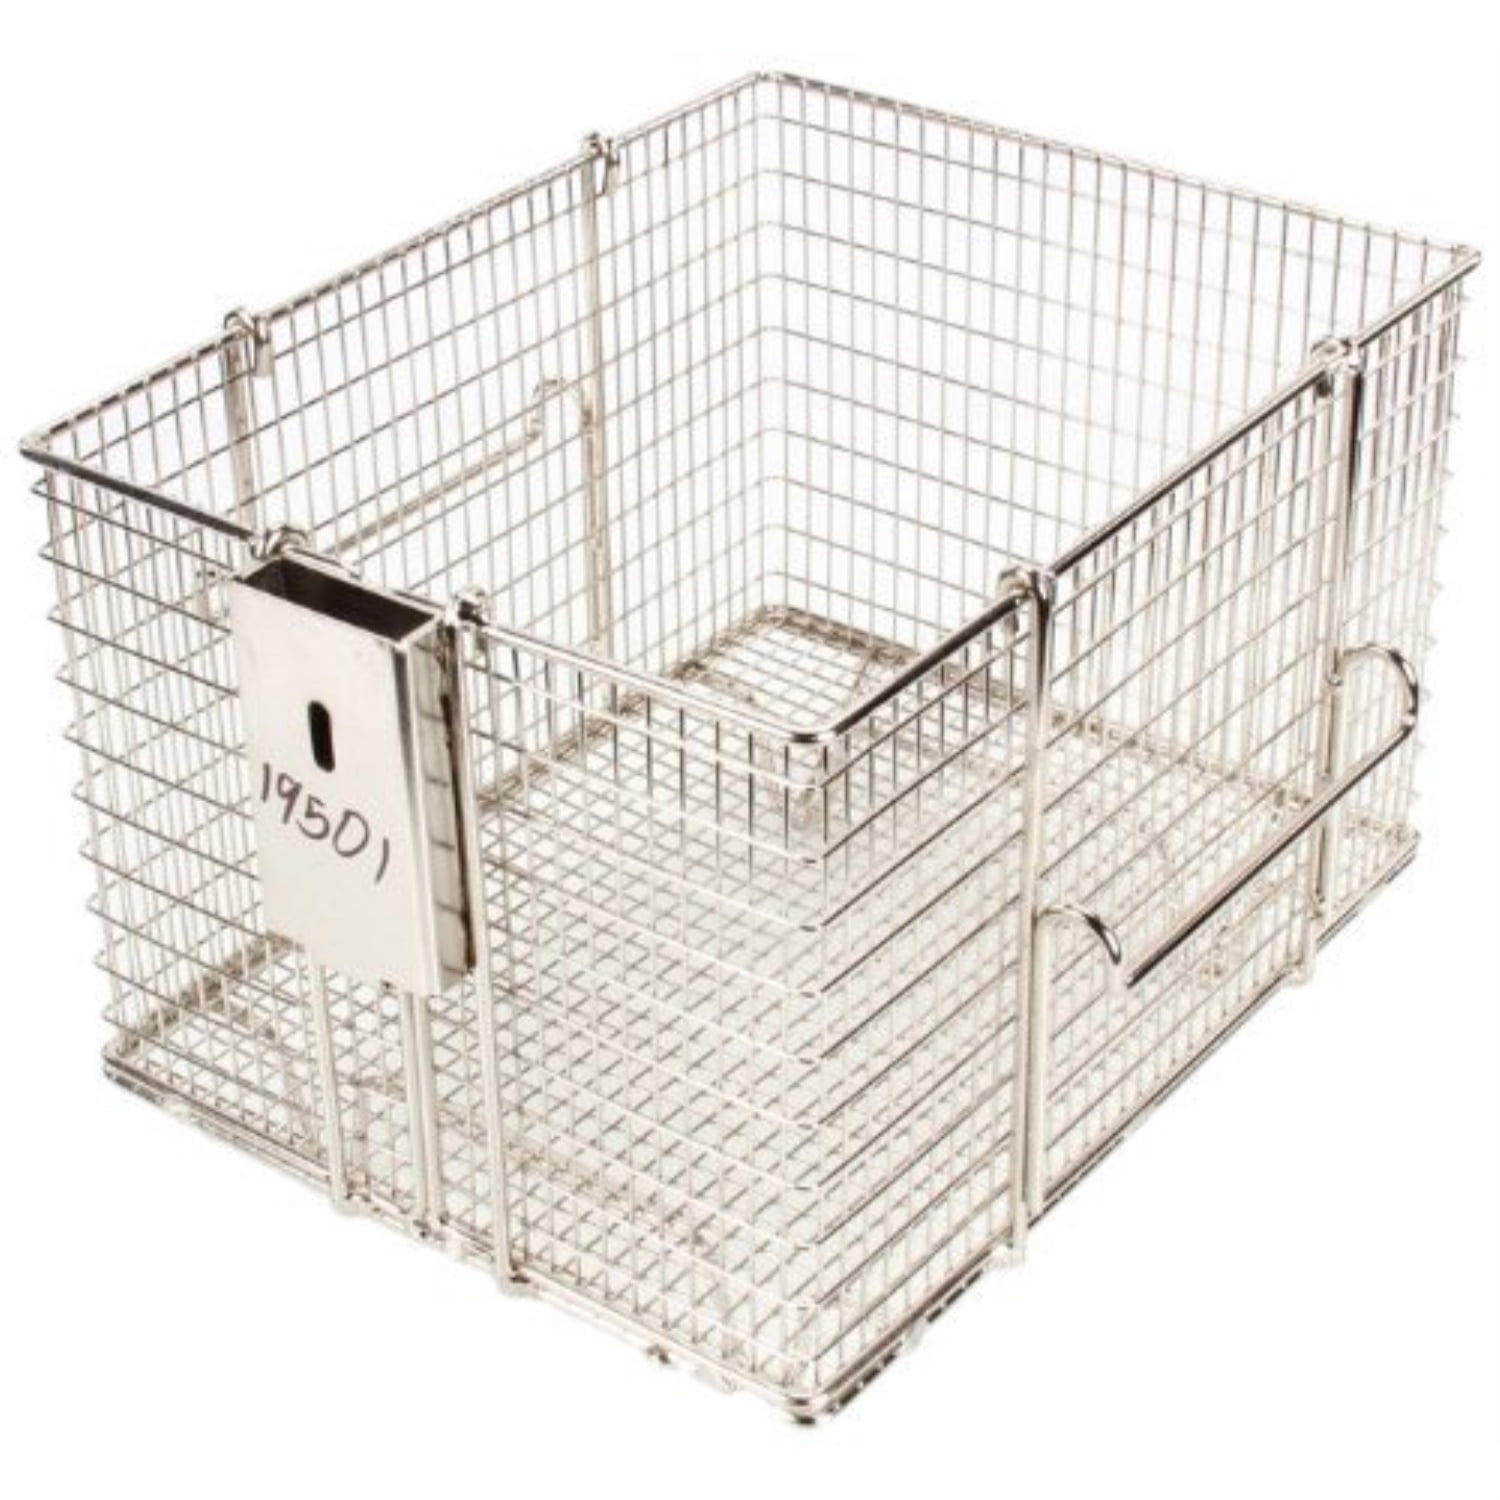 Henny Penny Gas Pressure Fryer Basket Top Quality Stainless Steel Hinged Shelves 